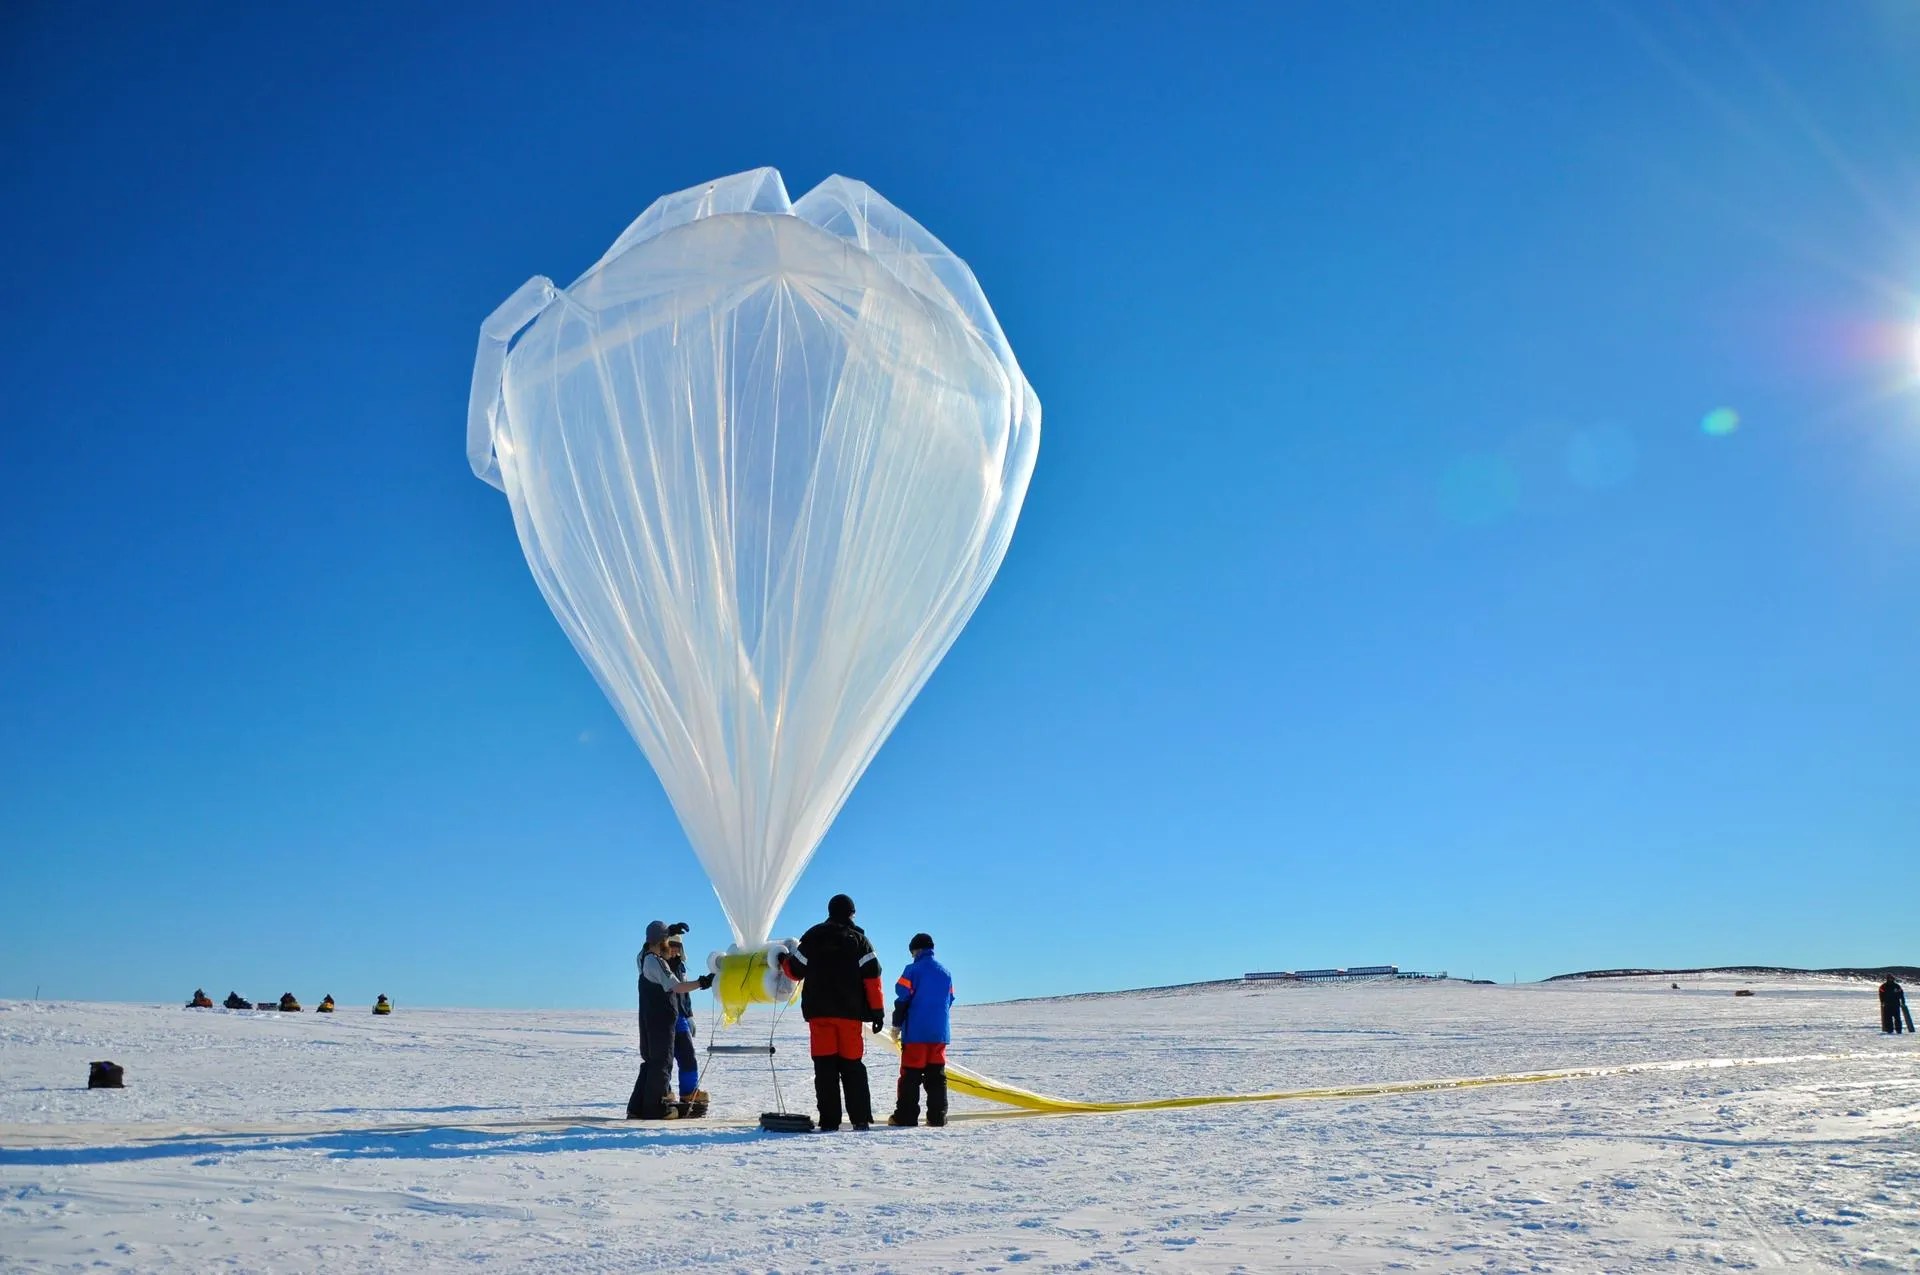 A large space weather balloon is surrounded by three people as it prepares for launch